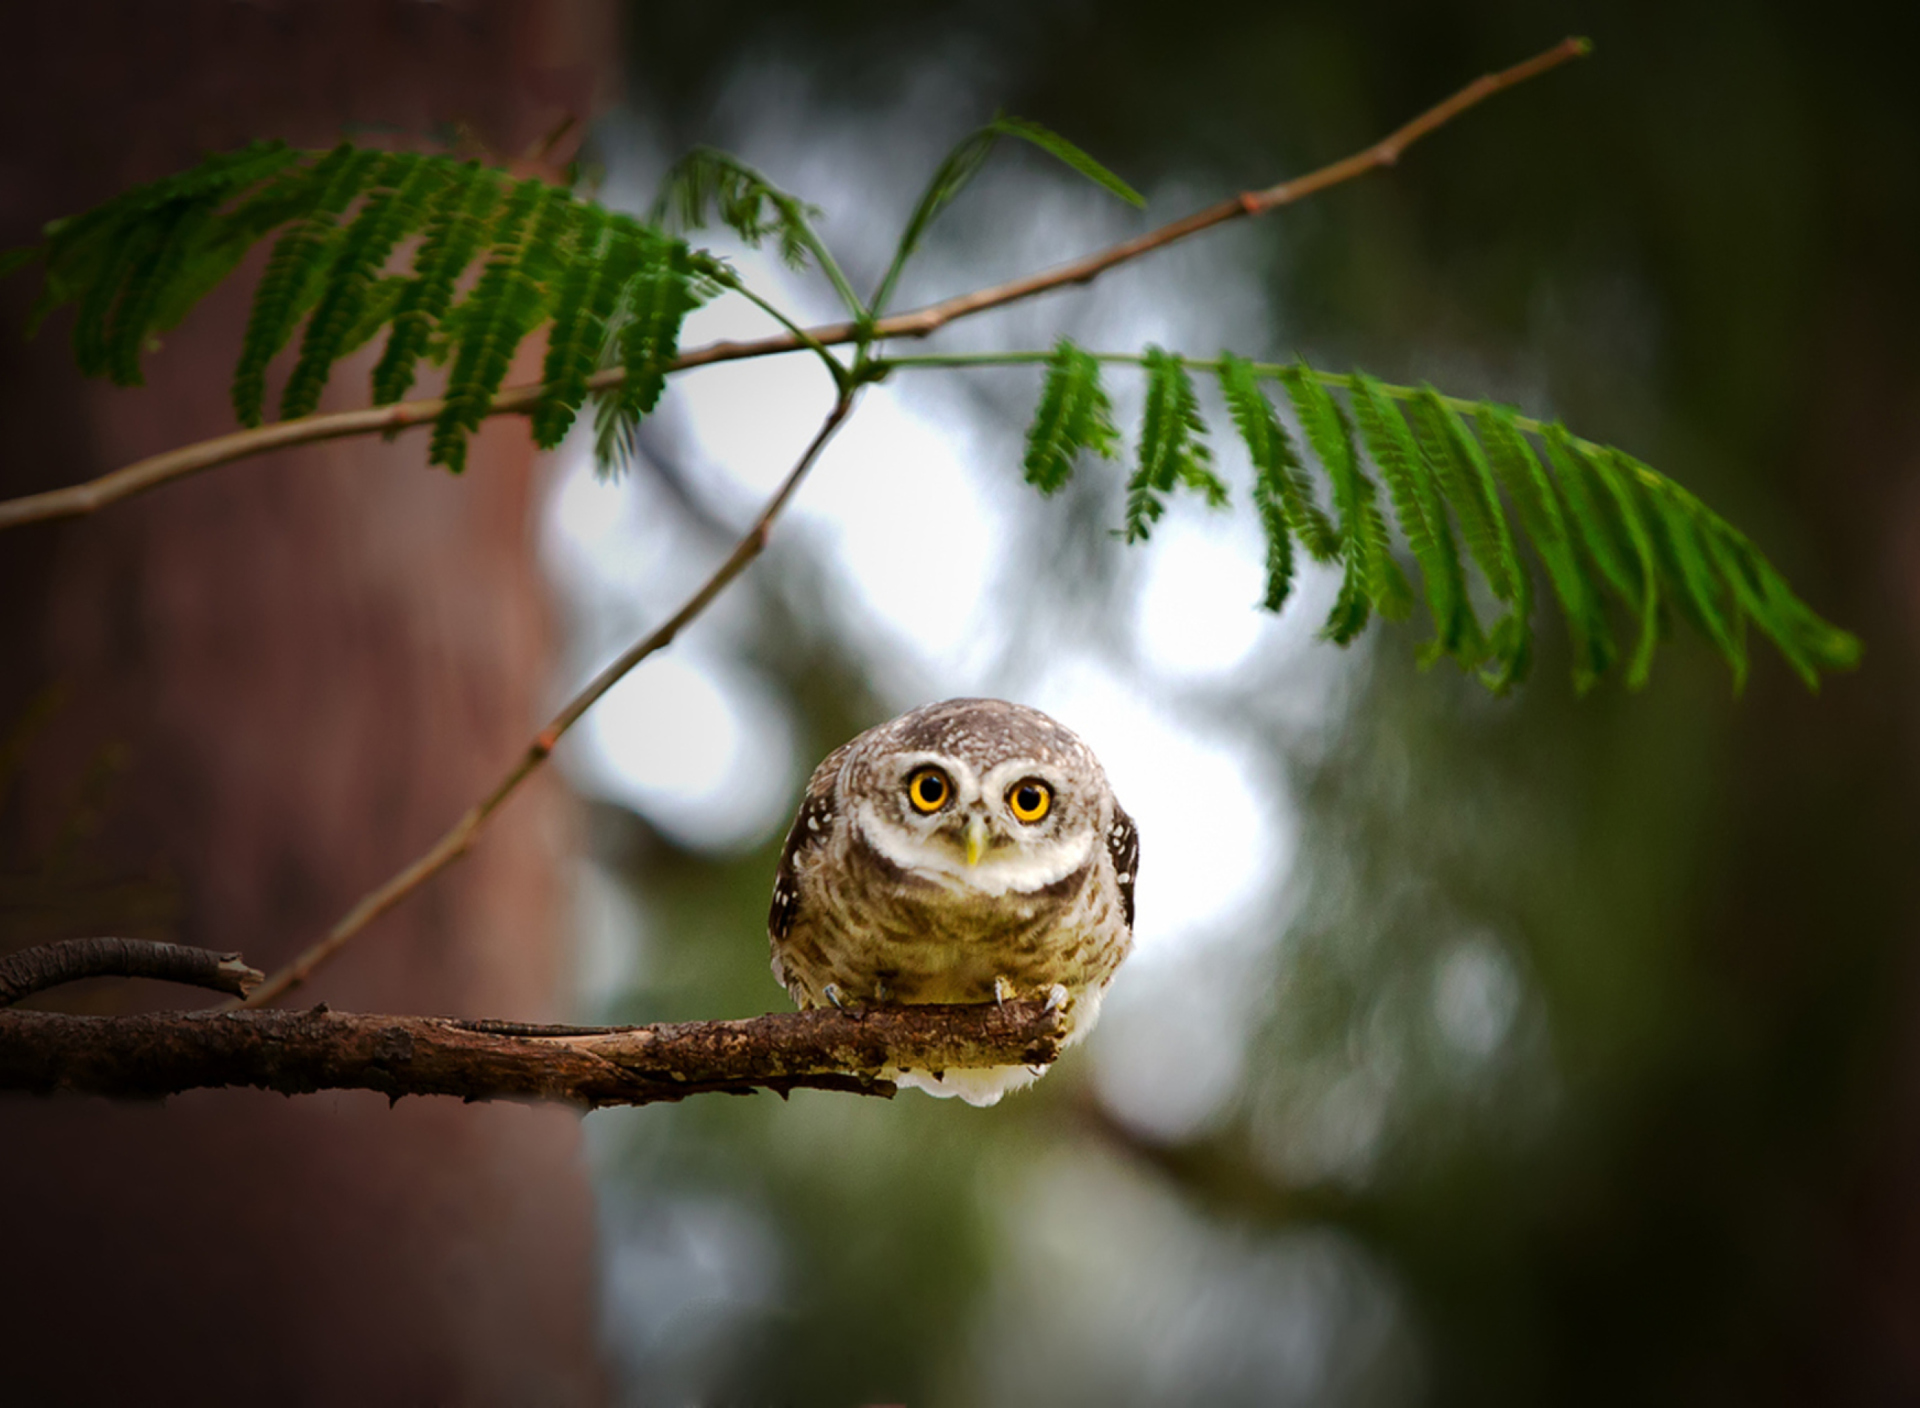 Cute And Funny Little Owl With Big Eyes screenshot #1 1920x1408